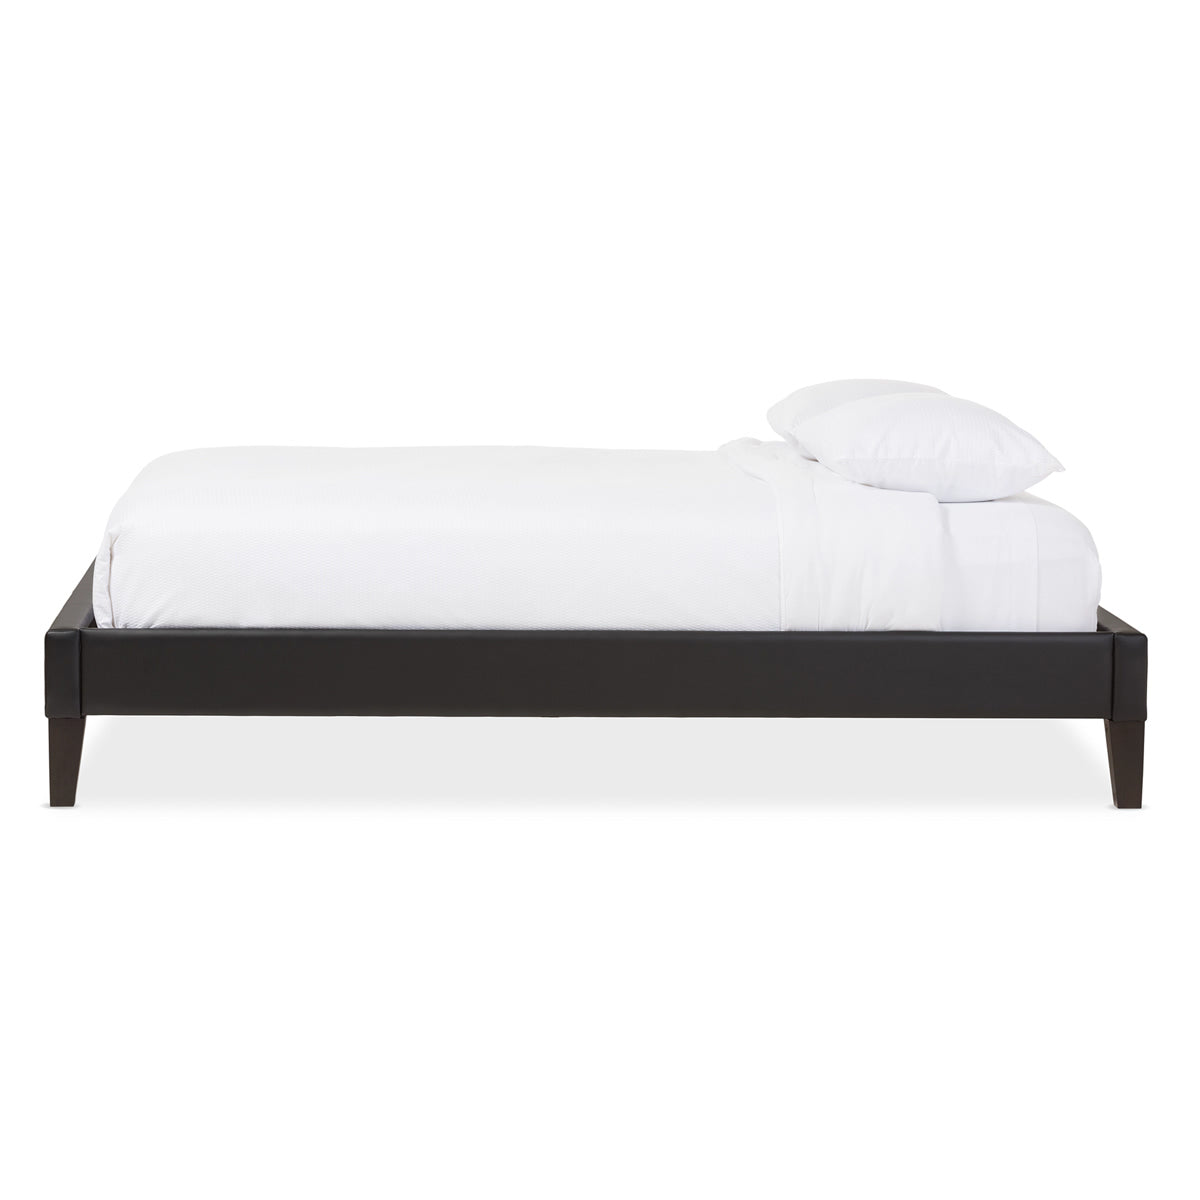 Baxton Studio Lancashire Modern and Contemporary Black Faux Leather Upholstered Queen Size Bed Frame with Tapered Legs  Baxton Studio-Queen Bed-Minimal And Modern - 3